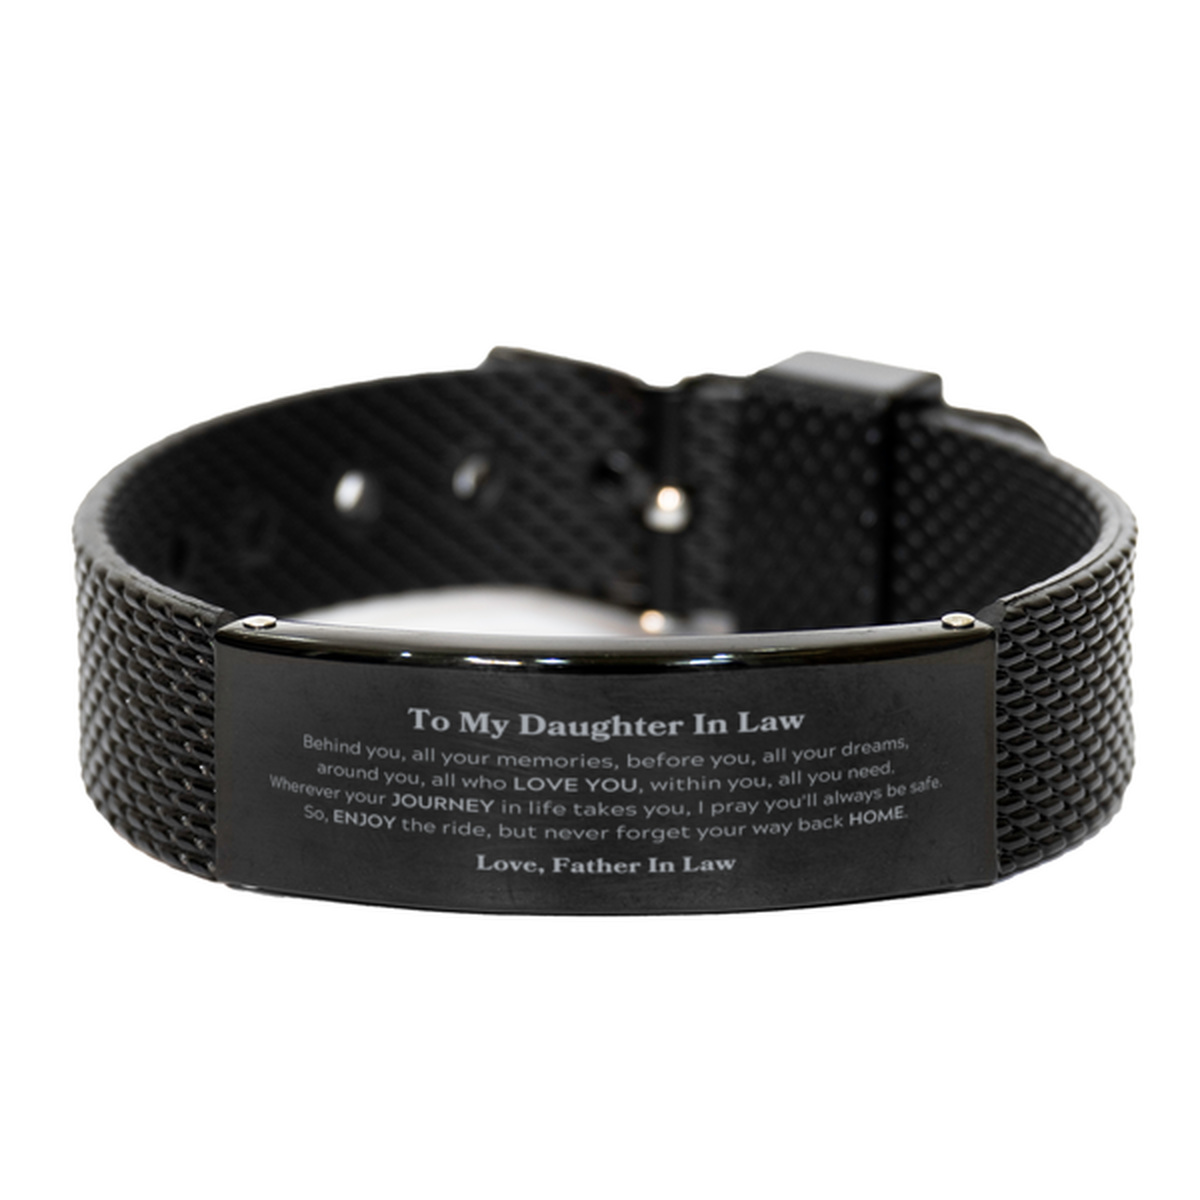 To My Daughter In Law Graduation Gifts from Father In Law, Daughter In Law Black Shark Mesh Bracelet Christmas Birthday Gifts for Daughter In Law Behind you, all your memories, before you, all your dreams. Love, Father In Law